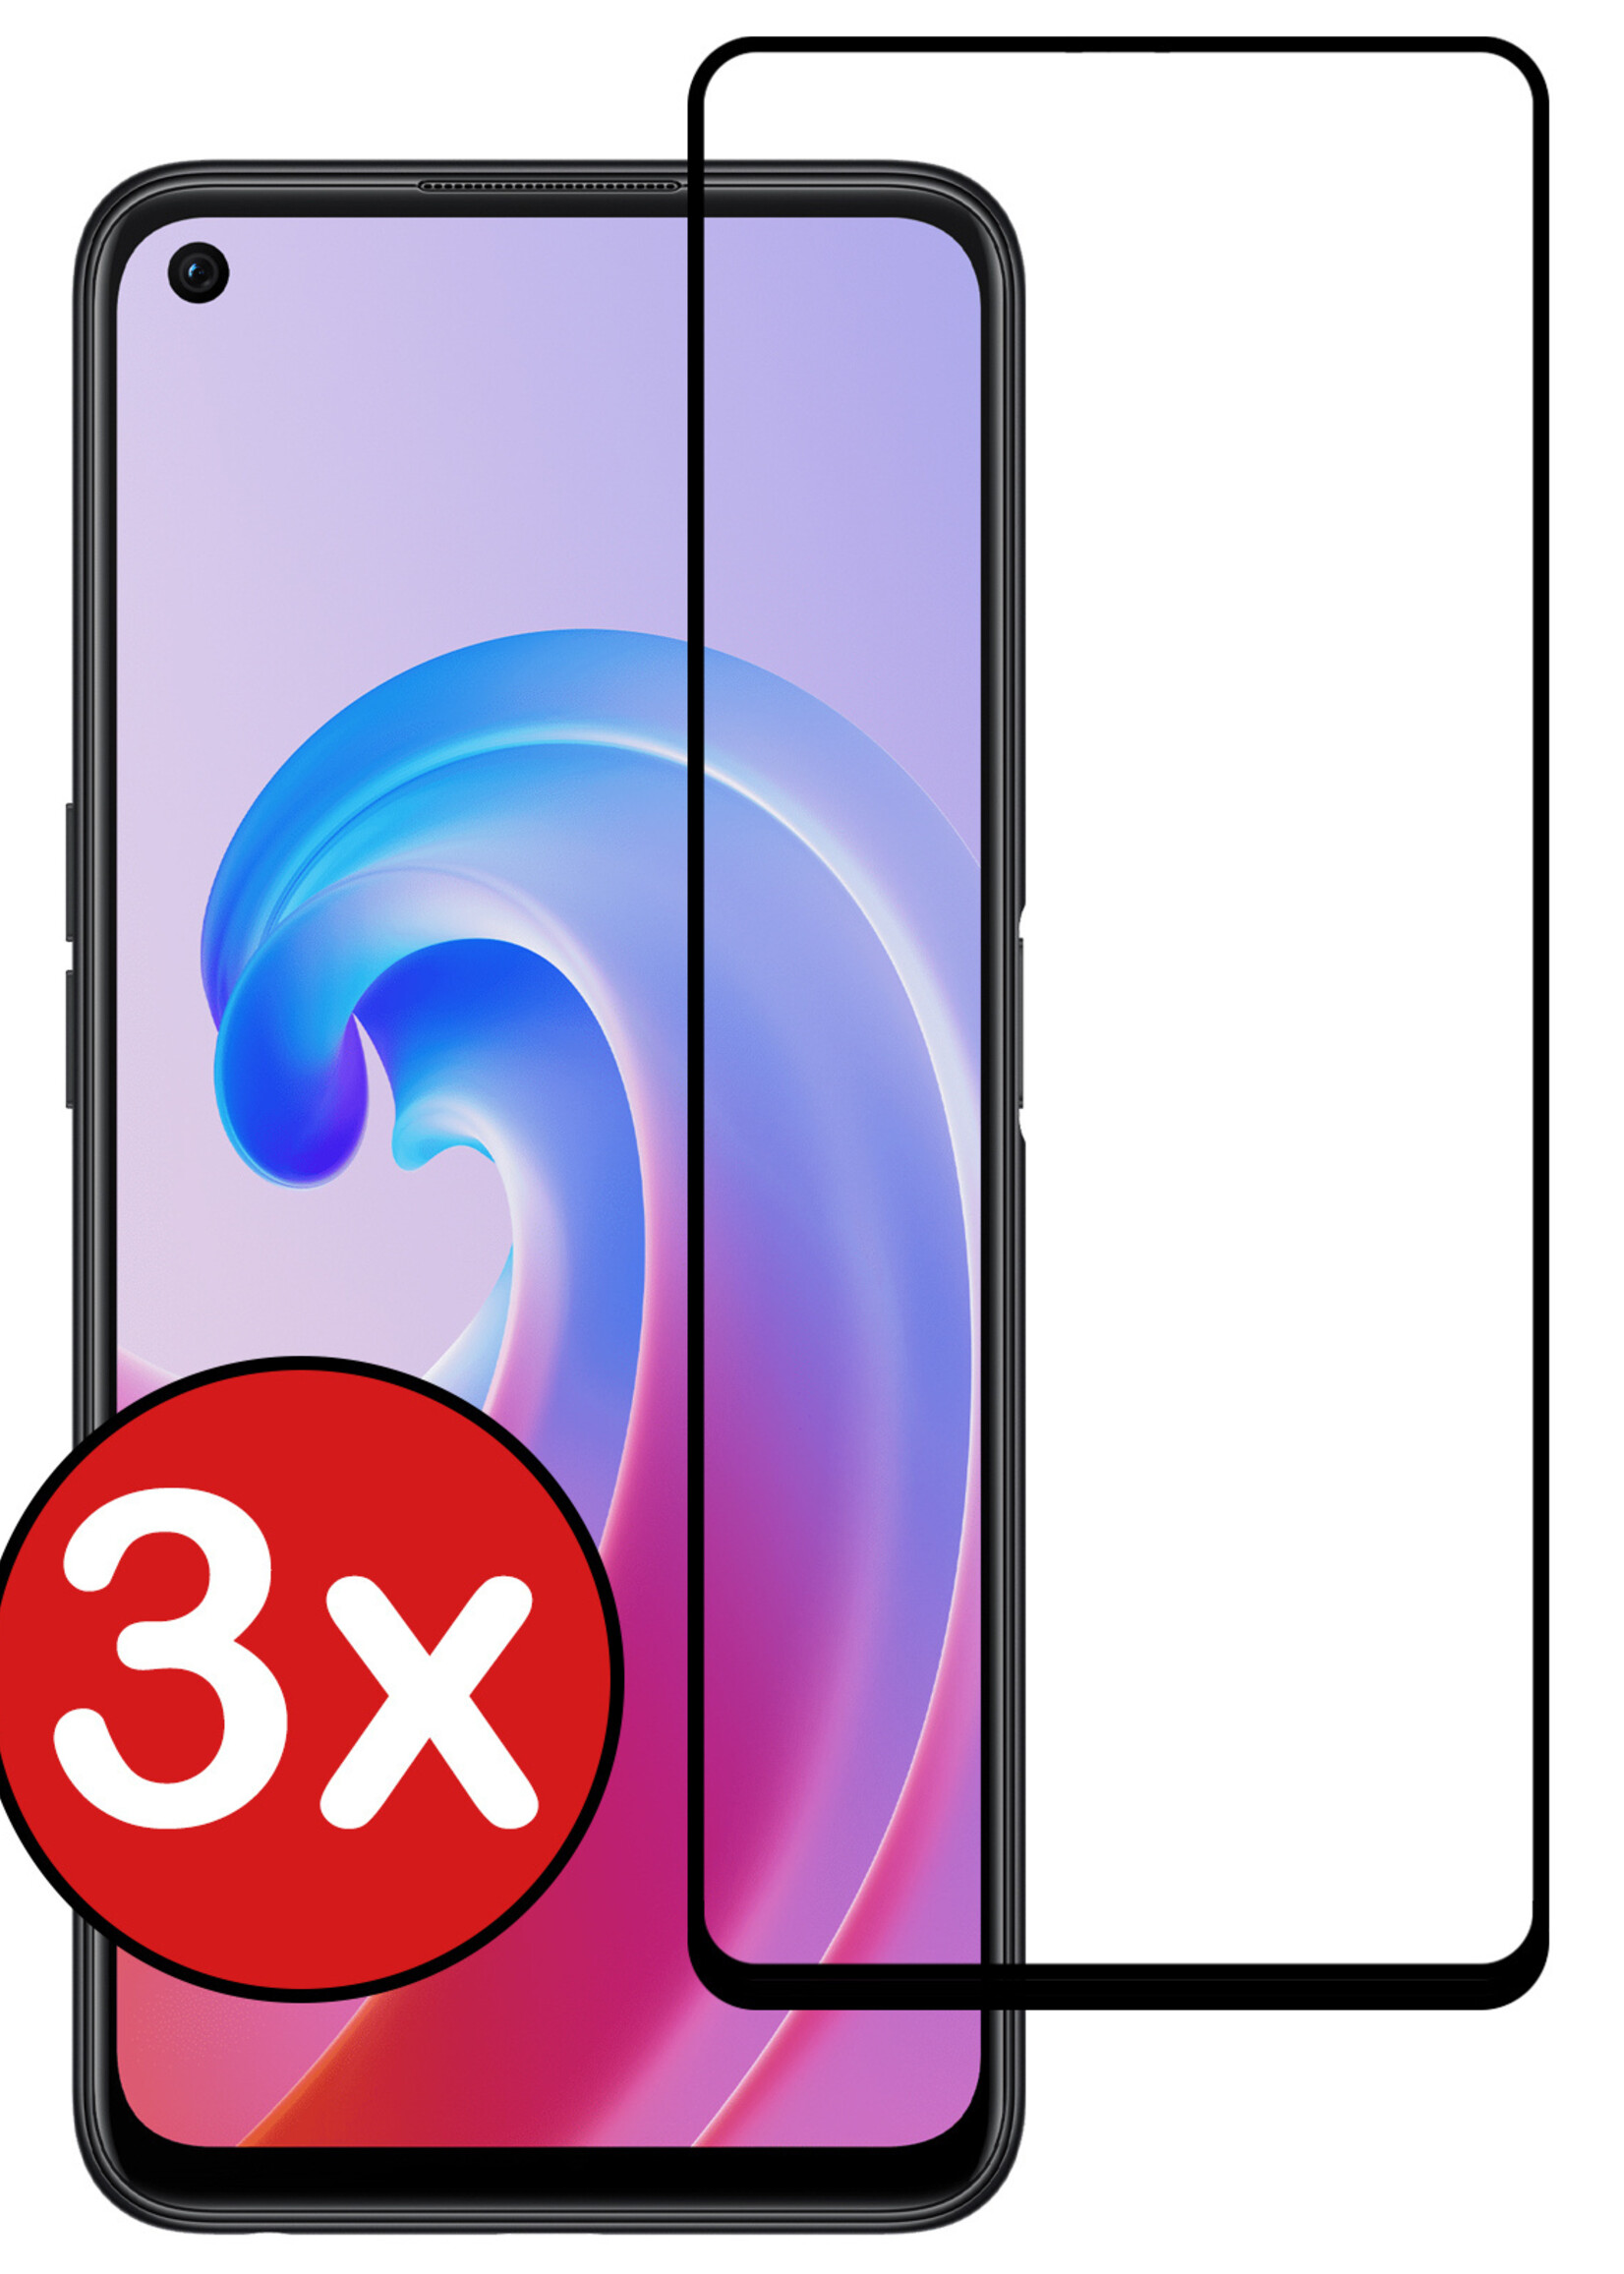 BTH Screenprotector Geschikt voor OPPO A96 Screenprotector Glas Gehard Tempered Glass Full Cover - Screenprotector Geschikt voor OPPO A96 Screen Protector Screen Cover - 3 PACK